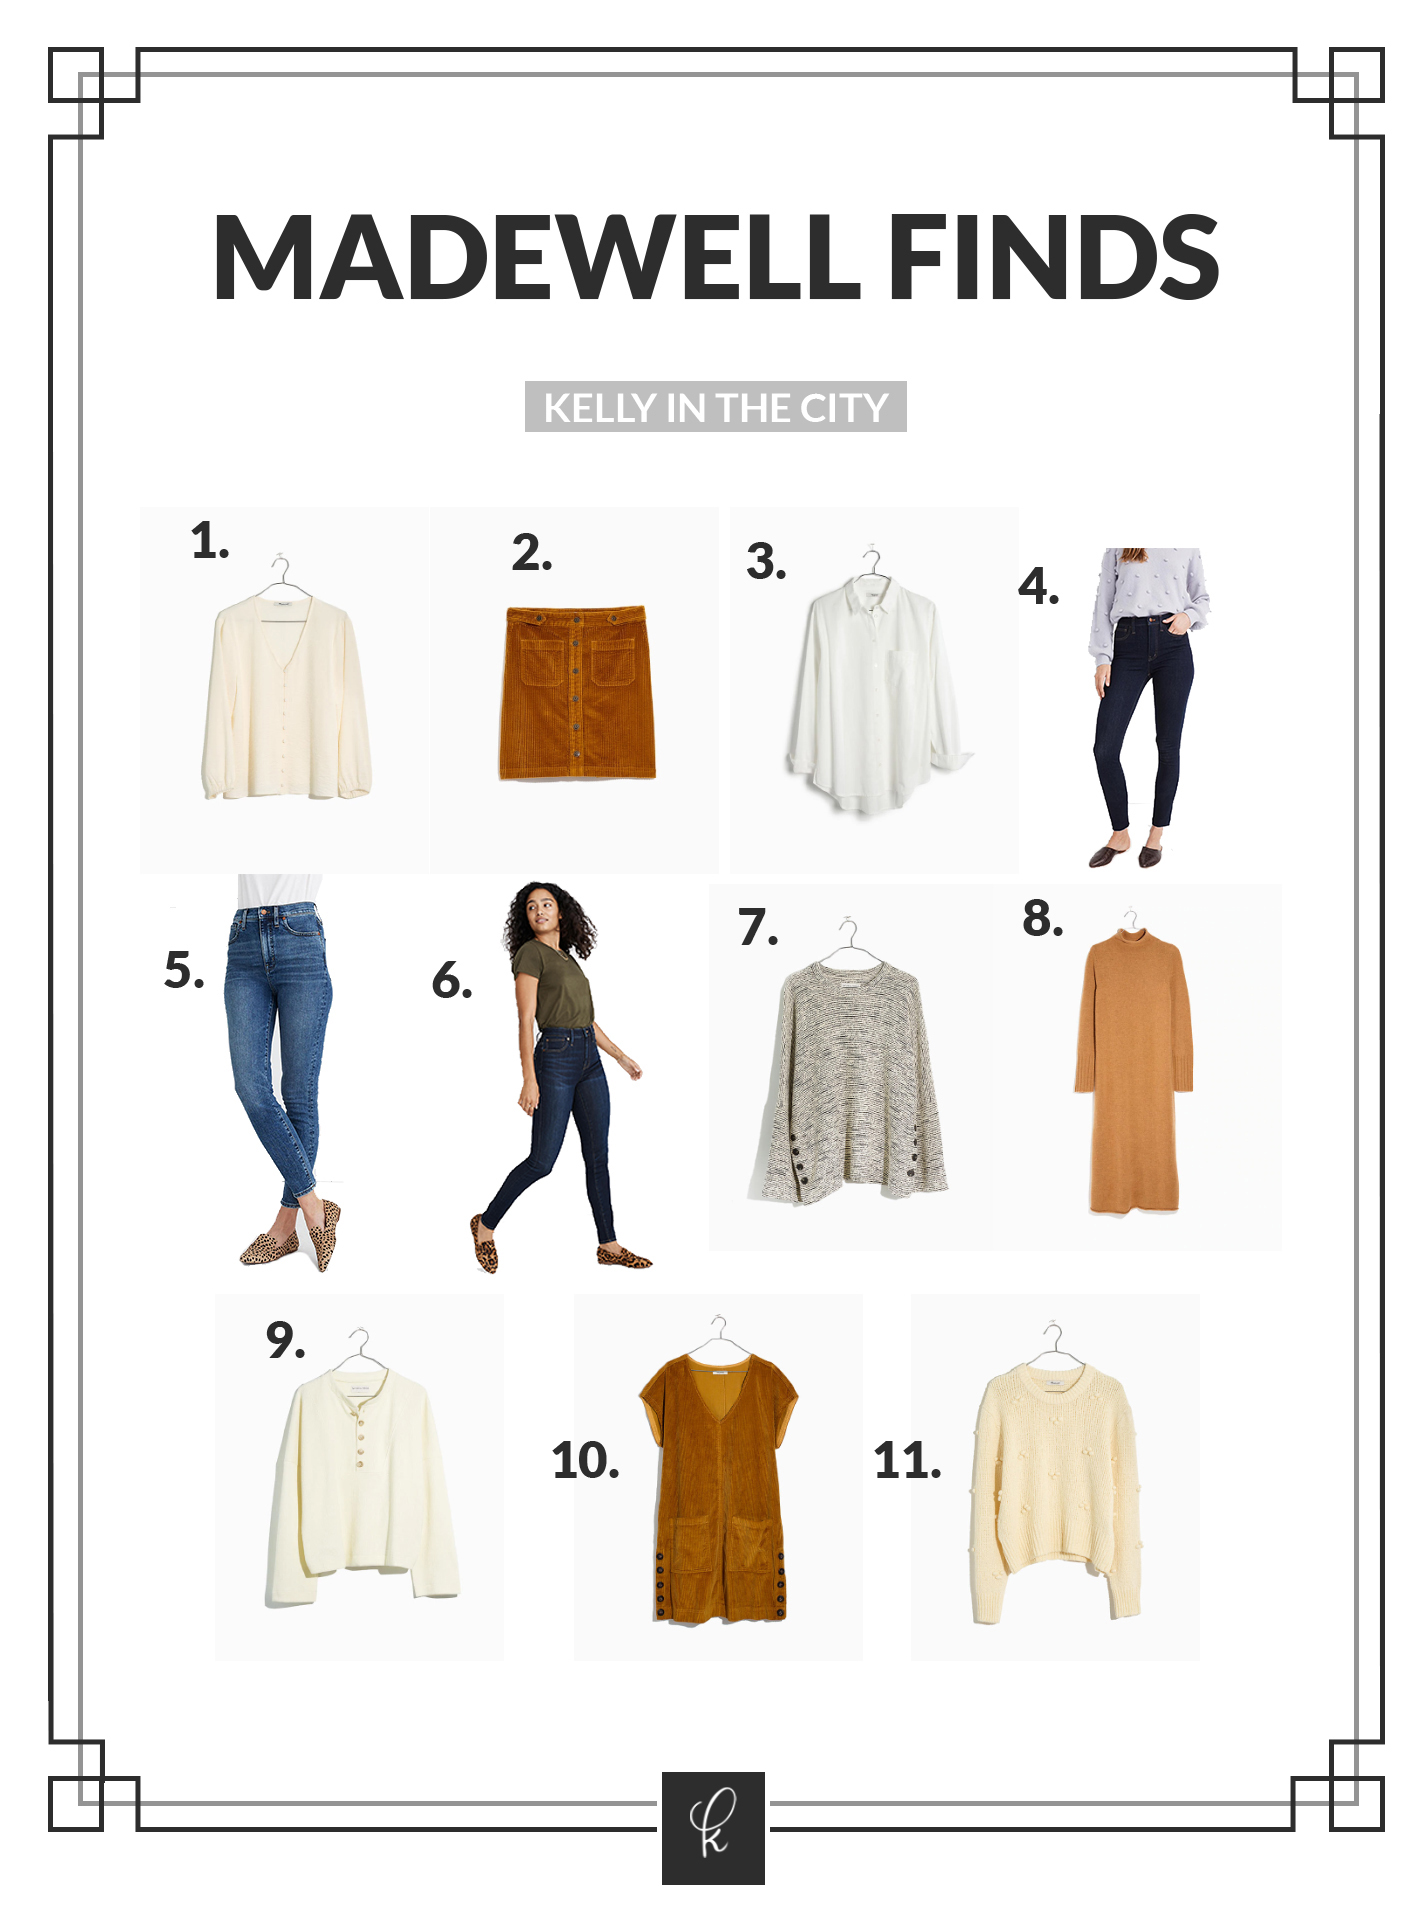 Madewell Finds